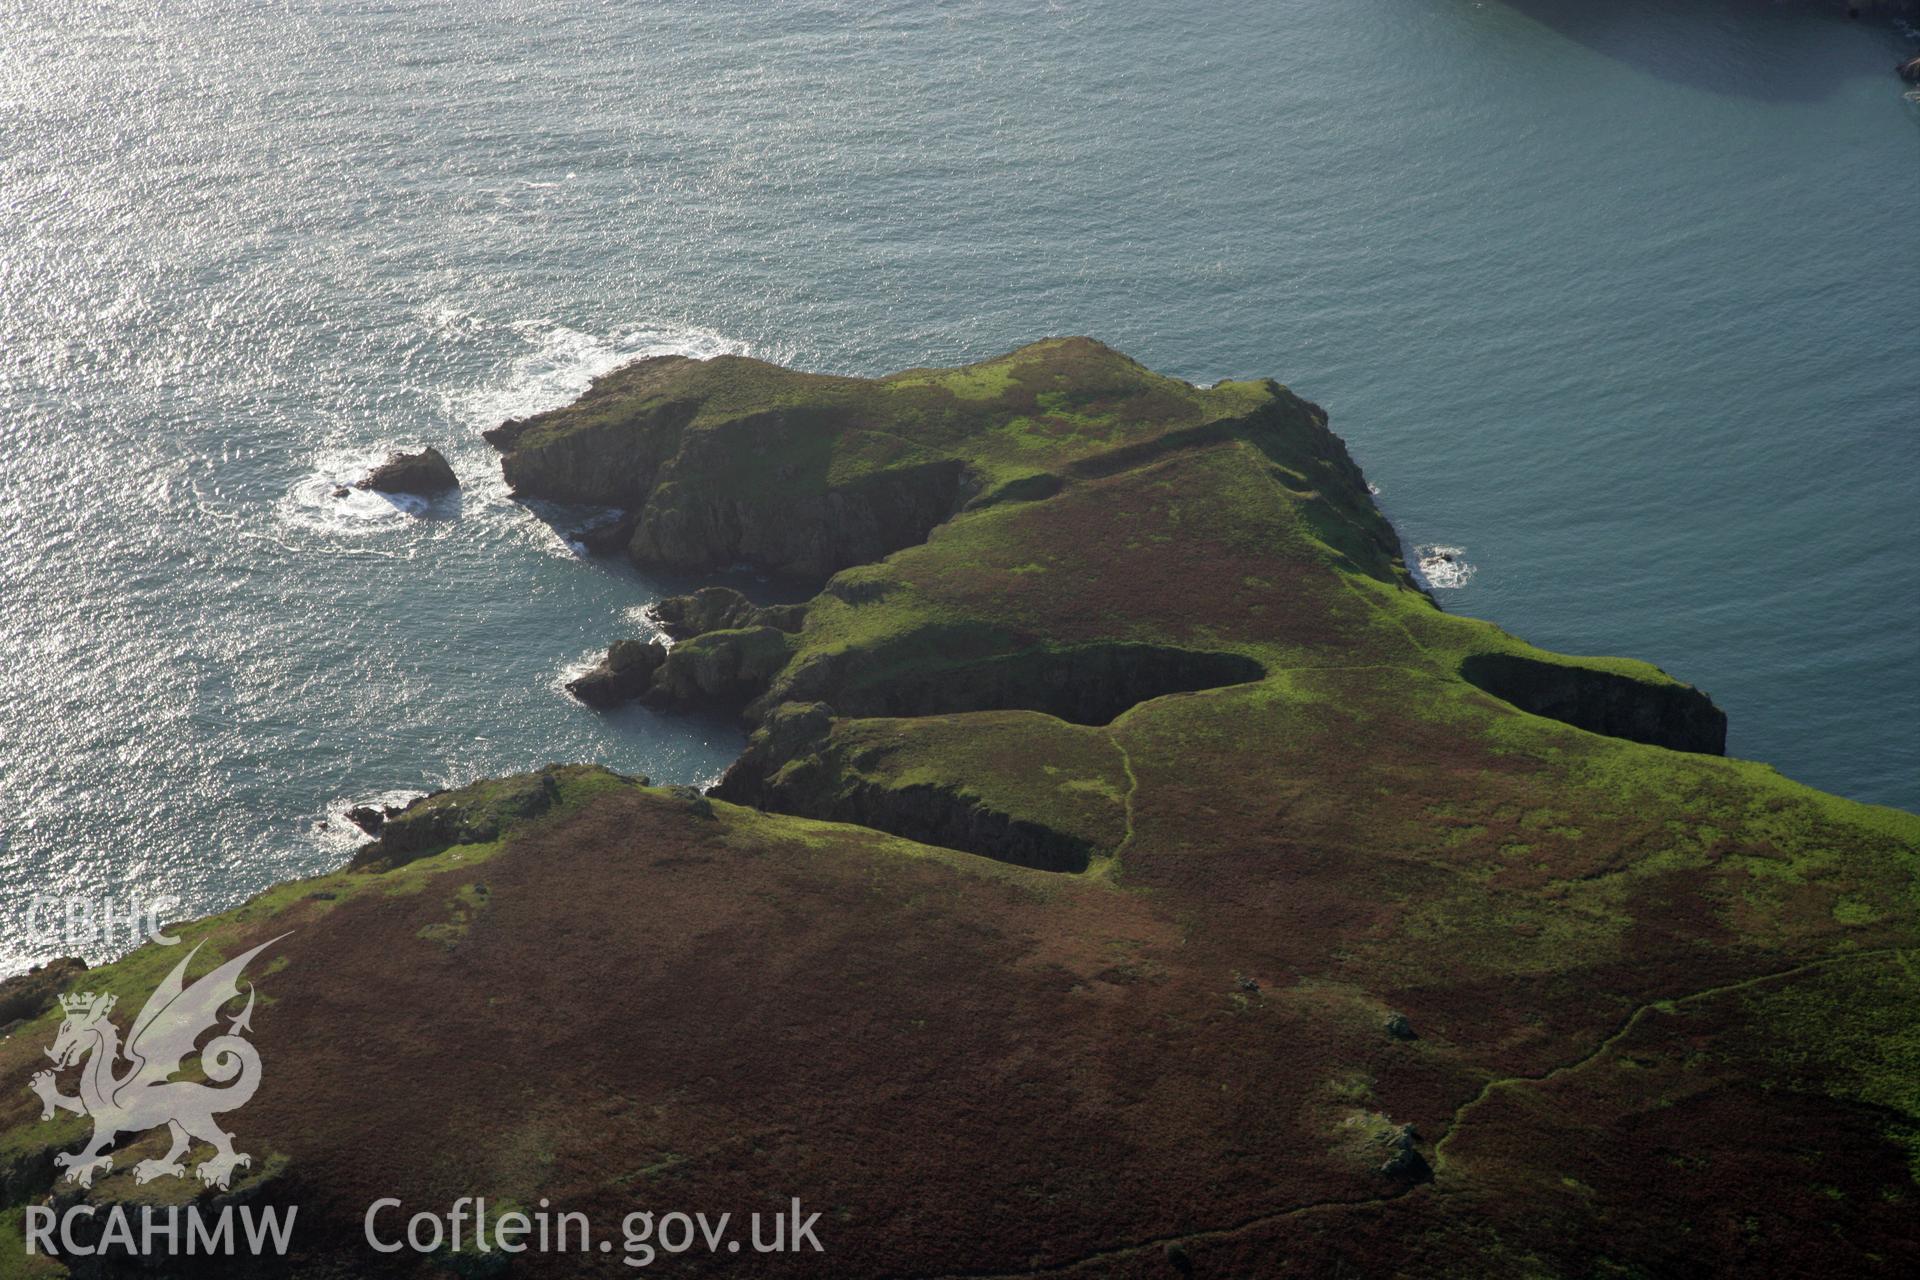 RCAHMW colour oblique photograph of field system, The Neck, Skomer Island. Taken by O. Davies & T. Driver on 22/11/2013.